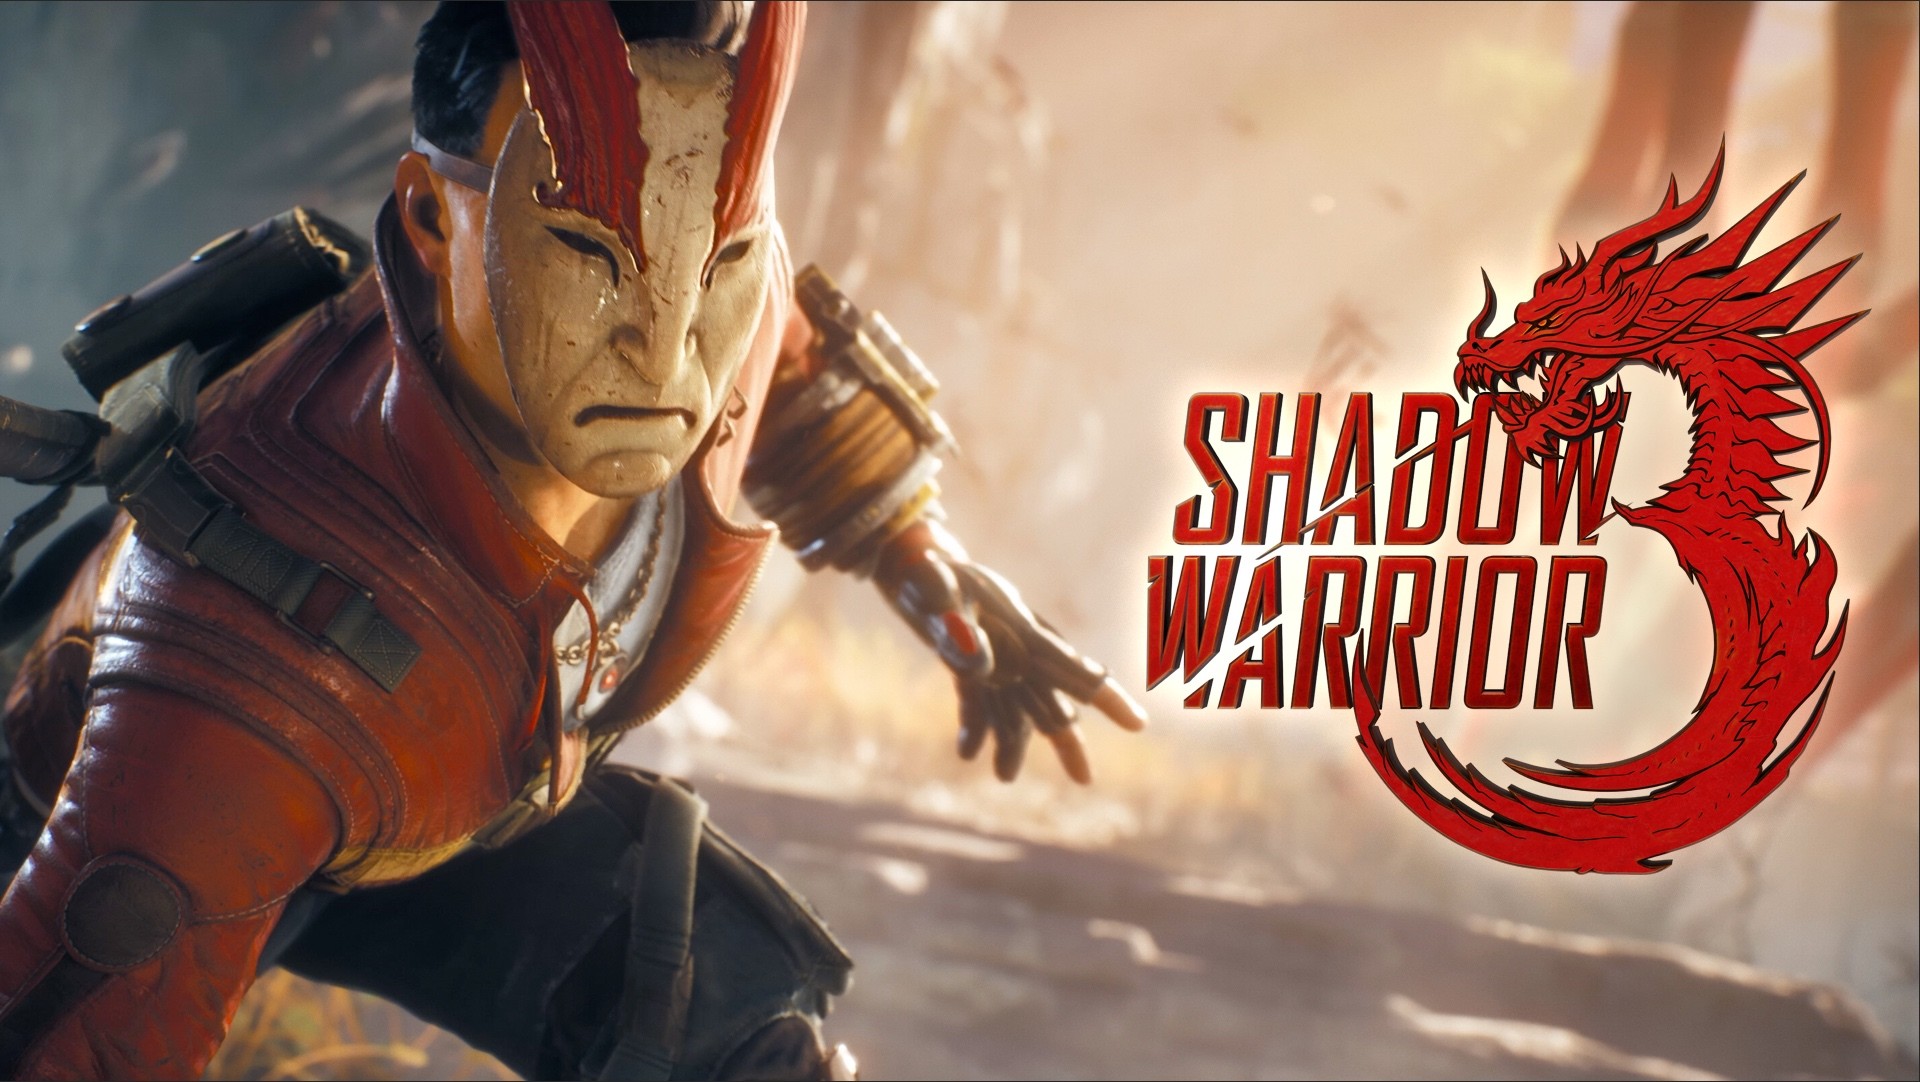 download shadow warrior 3 game pass